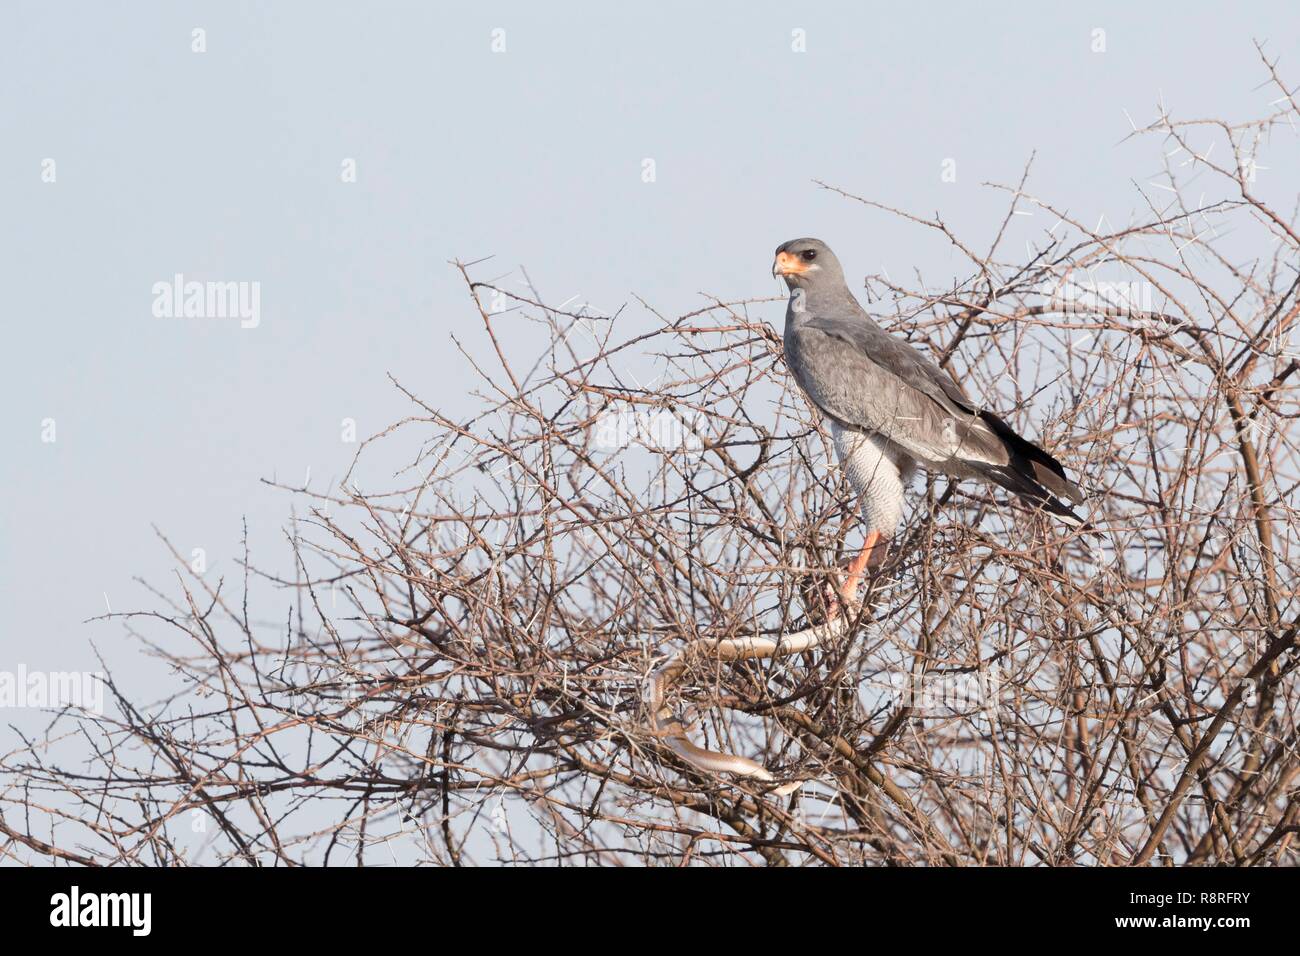 Bostwana, Central Kalahari Game Reserve, Pale chanting goshawk (Melierax canorus), adult perched on a tree with a prey a snake Stock Photo